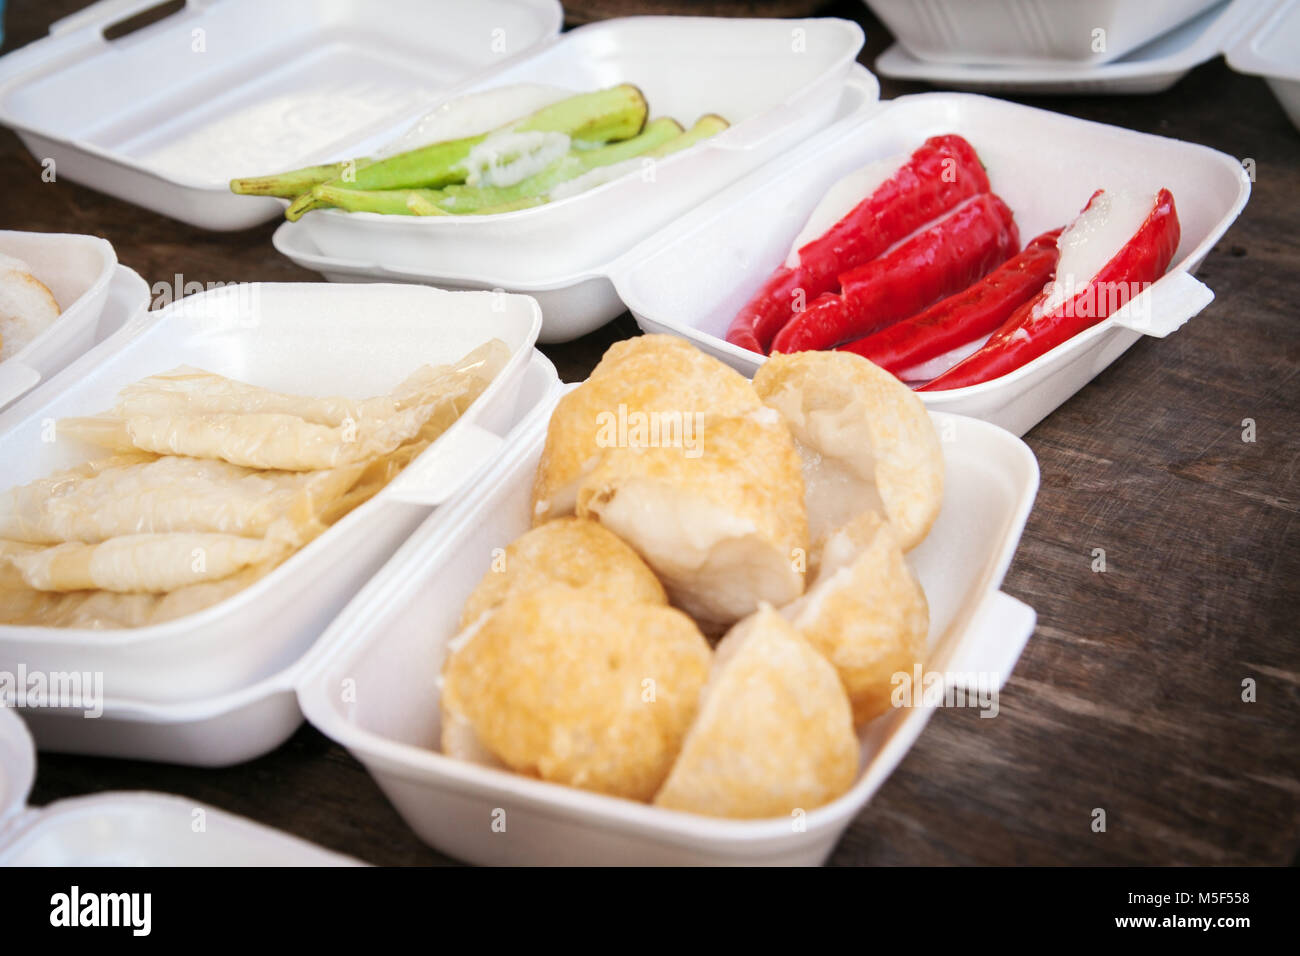 Malaysian packed lunch ideas culinary delights in Malaysia displayed on a table top ready to take away in polystyrene trays. Fast food for the workers Stock Photo